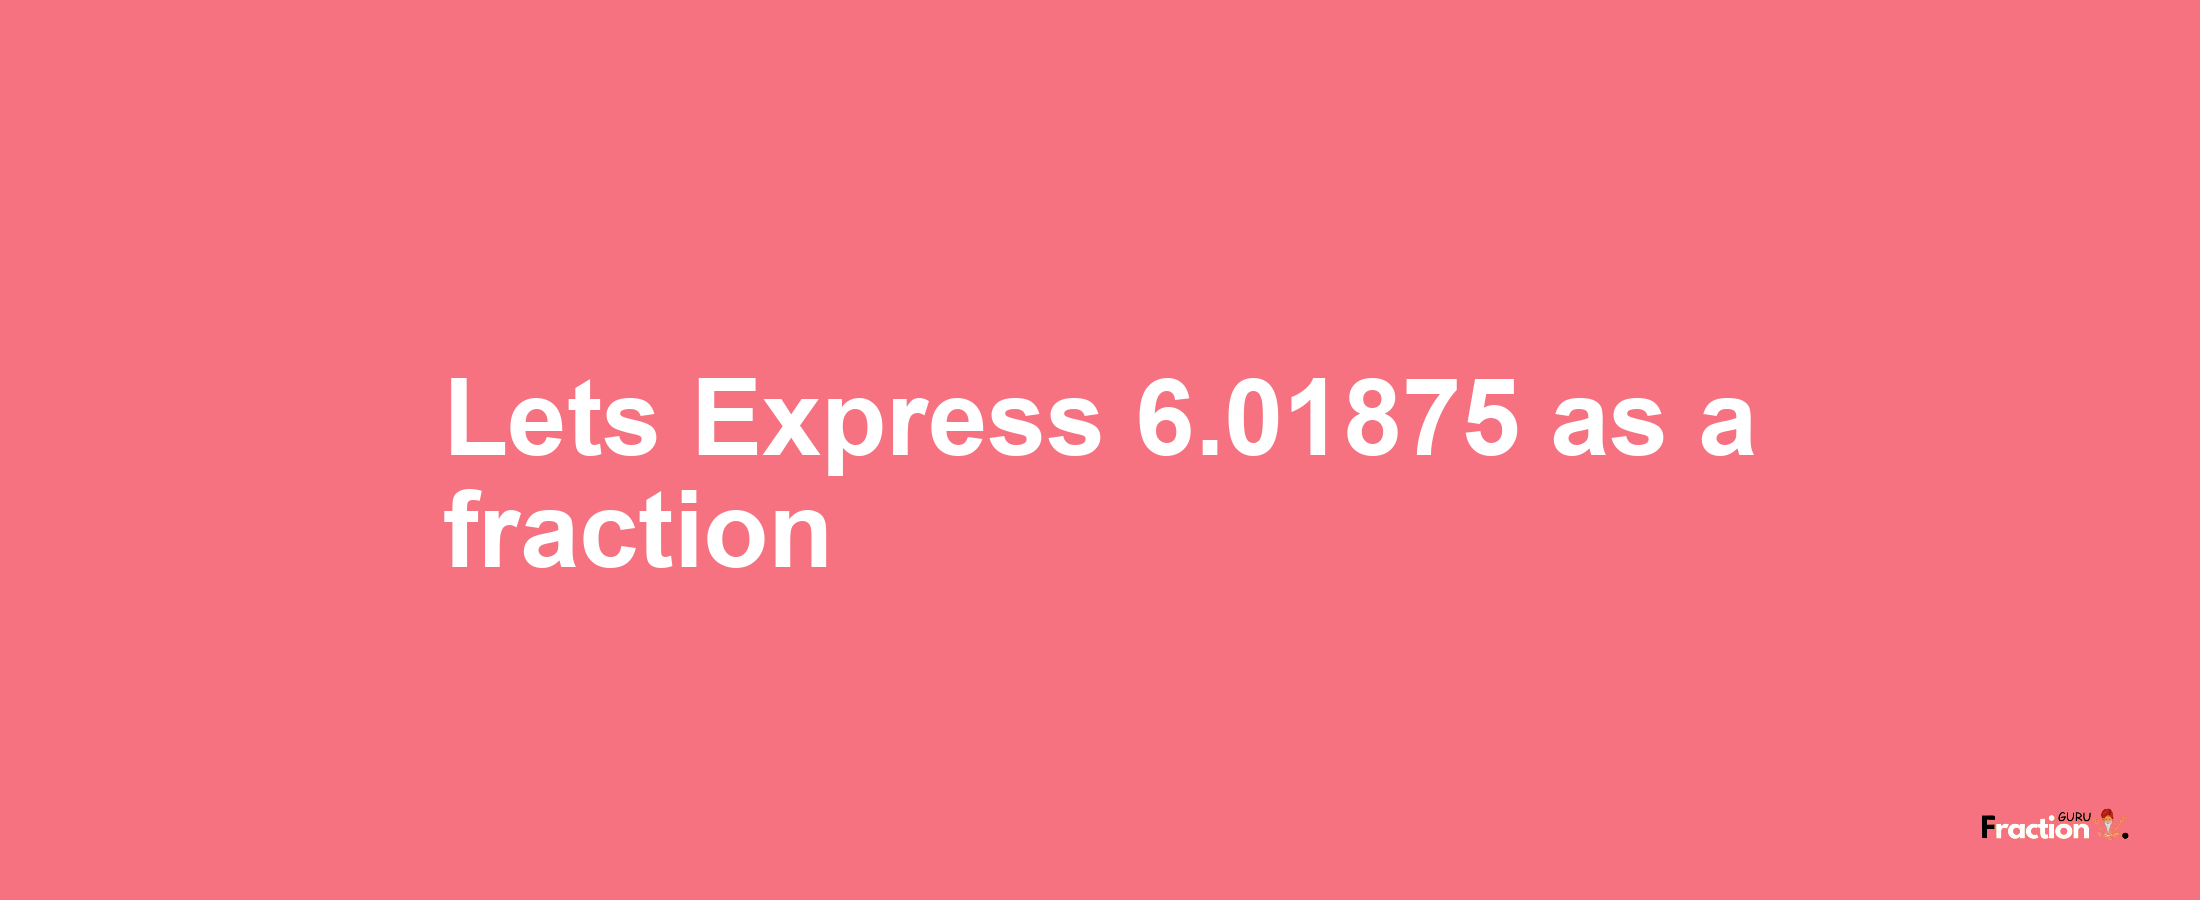 Lets Express 6.01875 as afraction